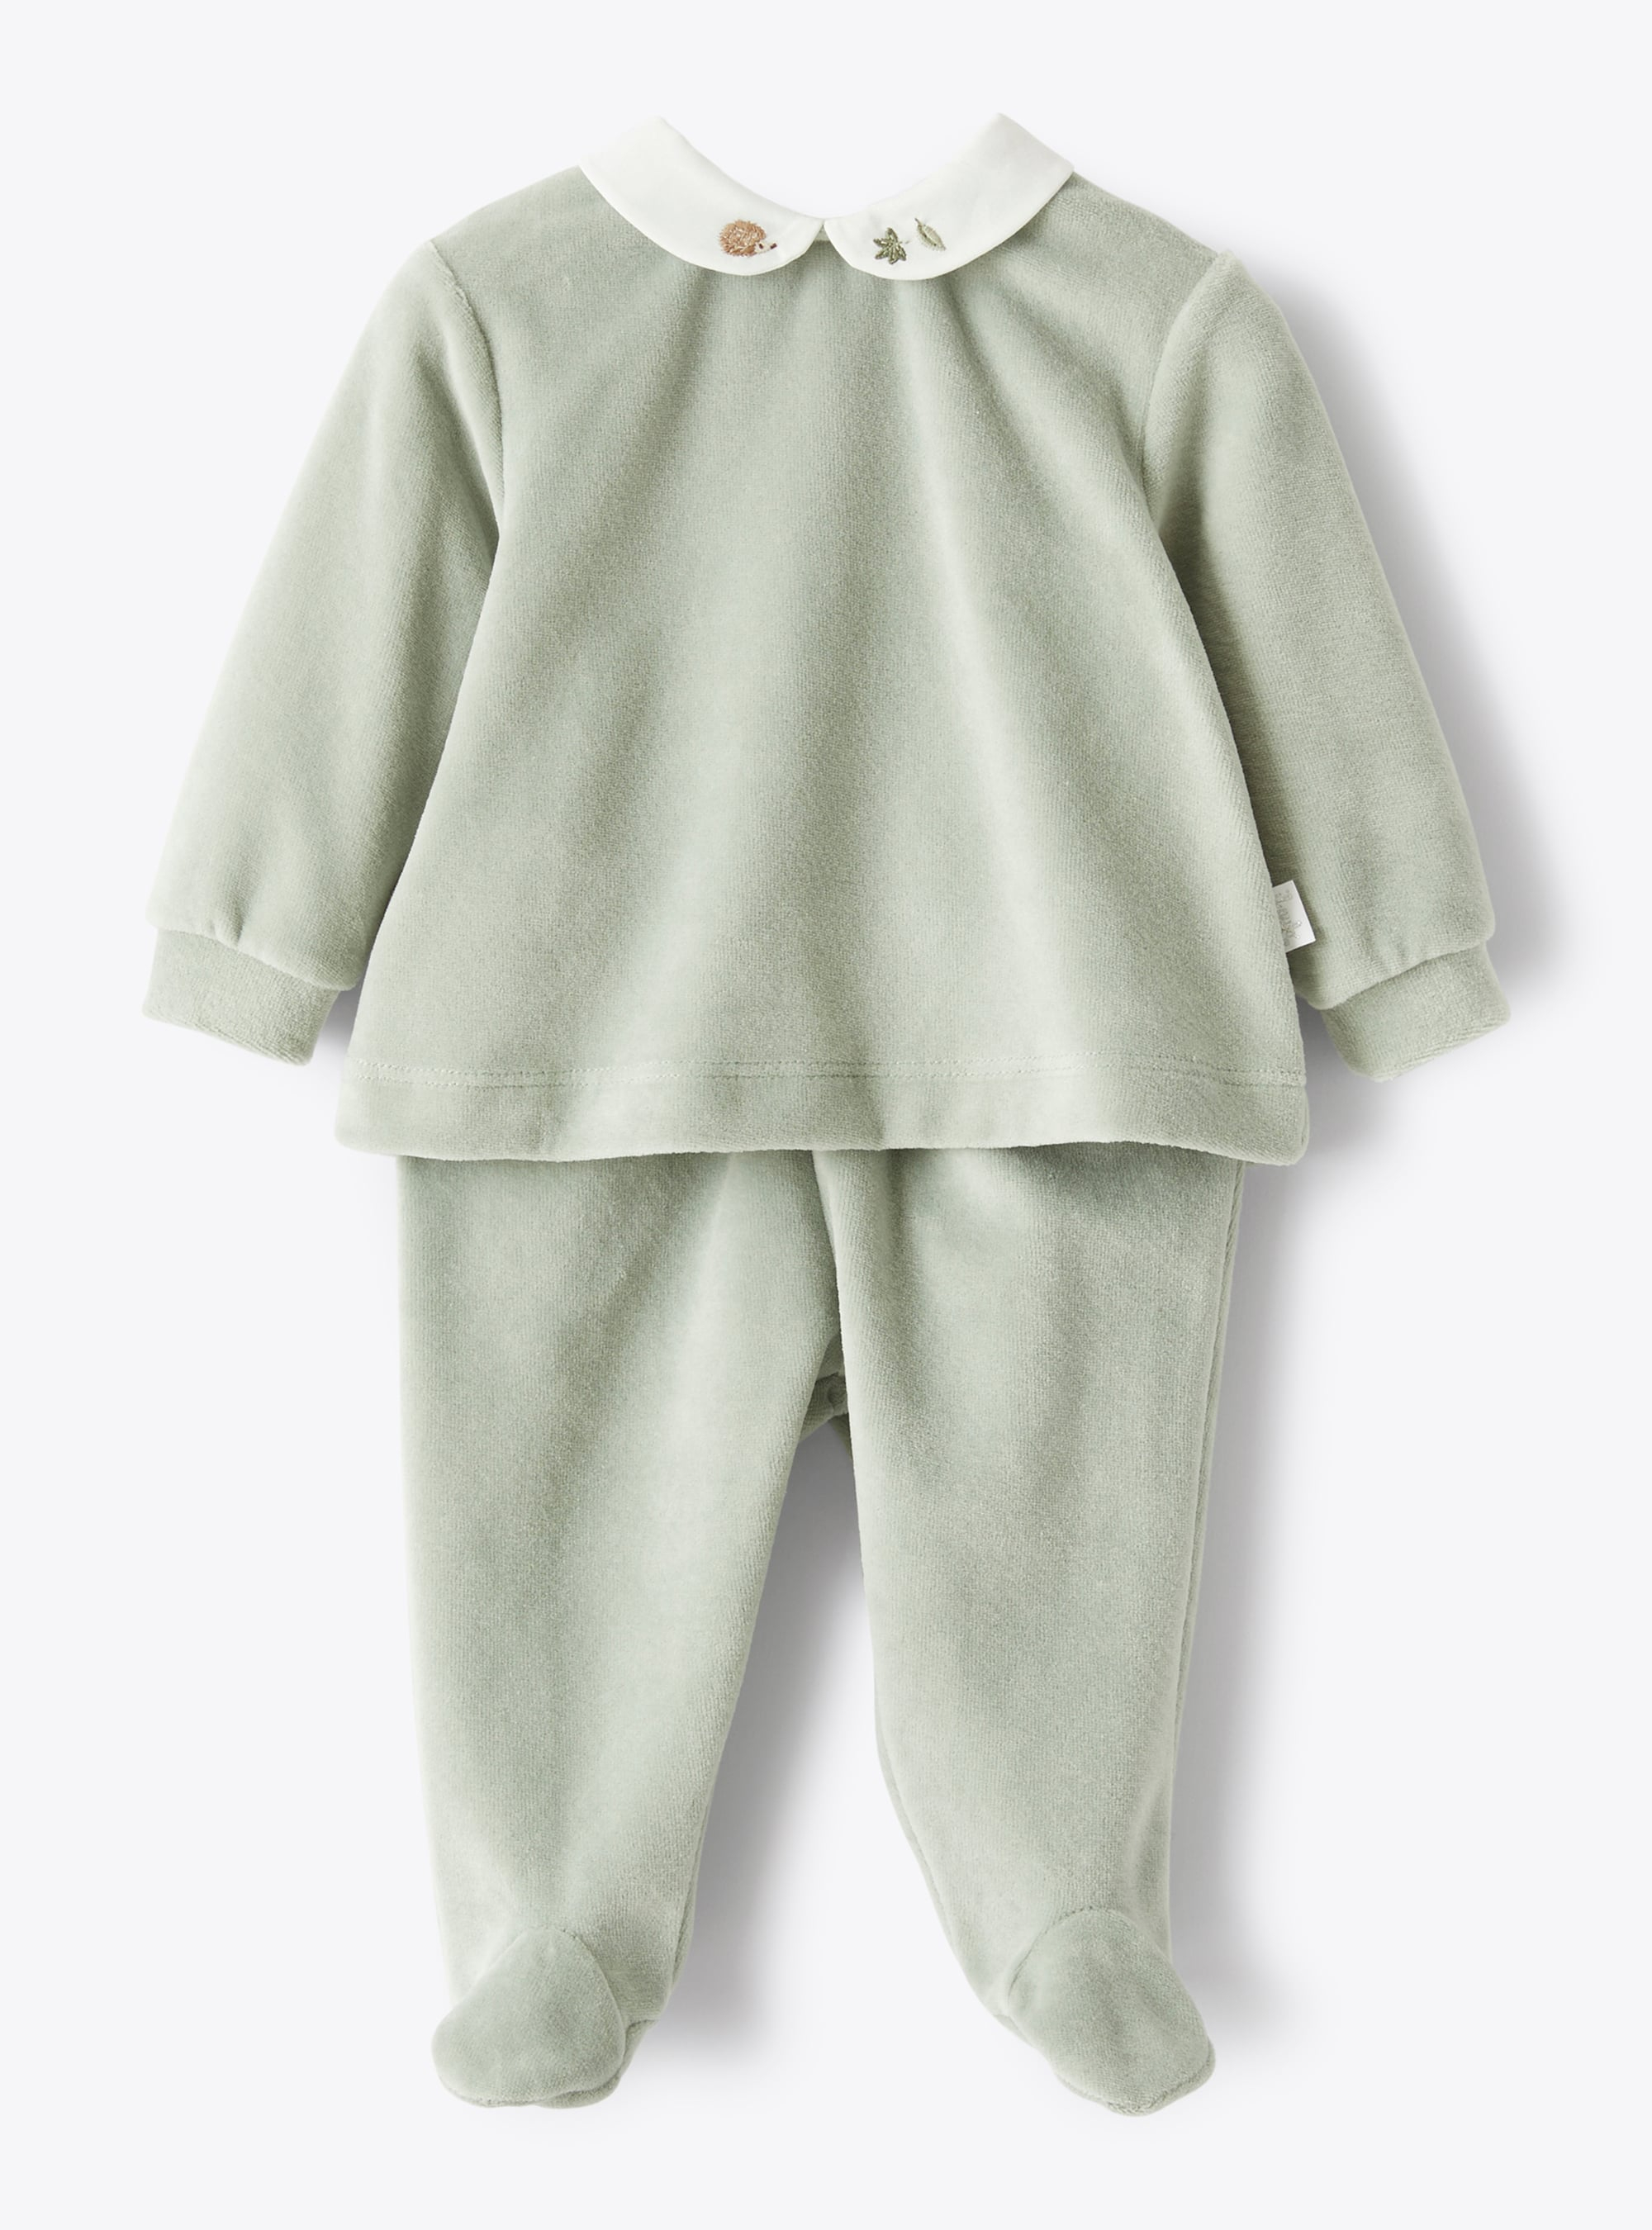 Two-piece babysuit in green chenille - Two-piece sets - Il Gufo